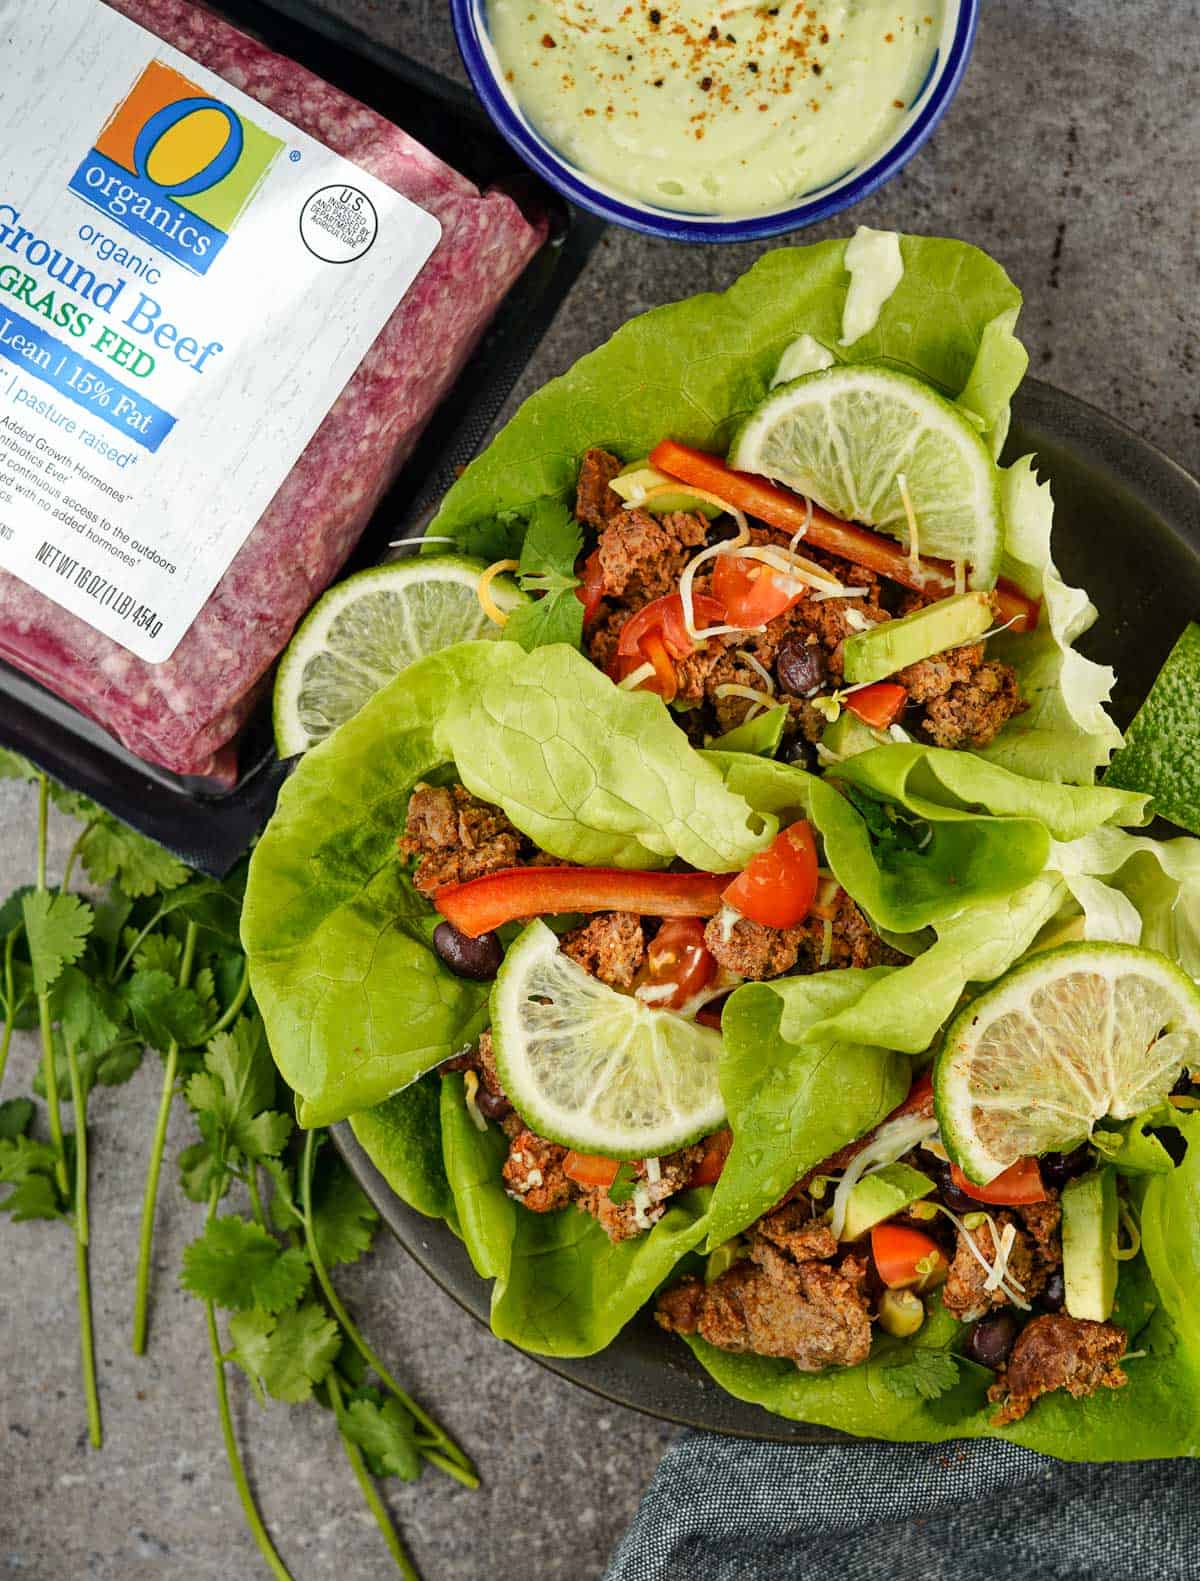 Ground beef lettuce wraps with a pound of O Organics ground beef packaging